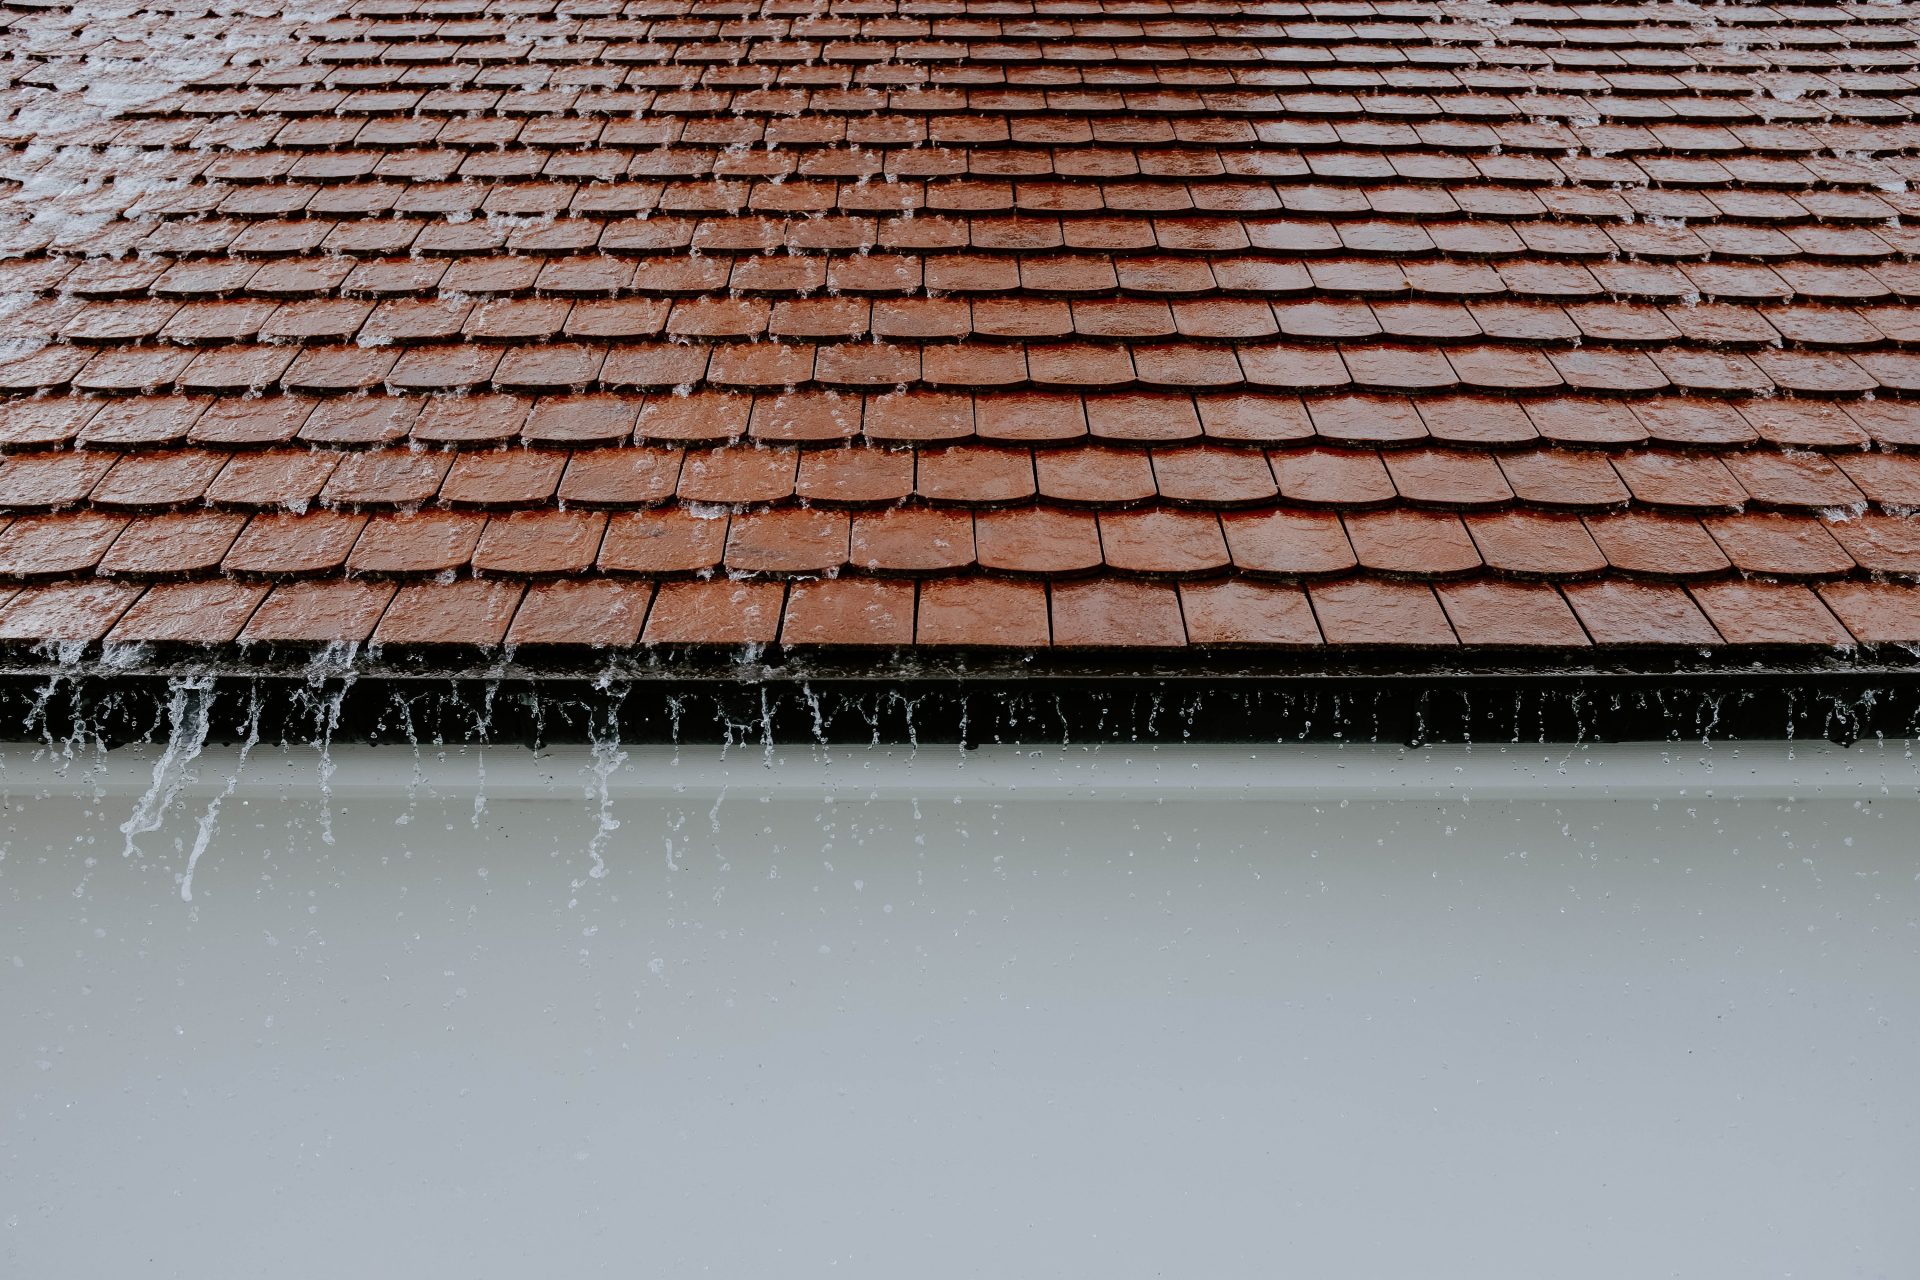 rain rushing off of a red tiled roof